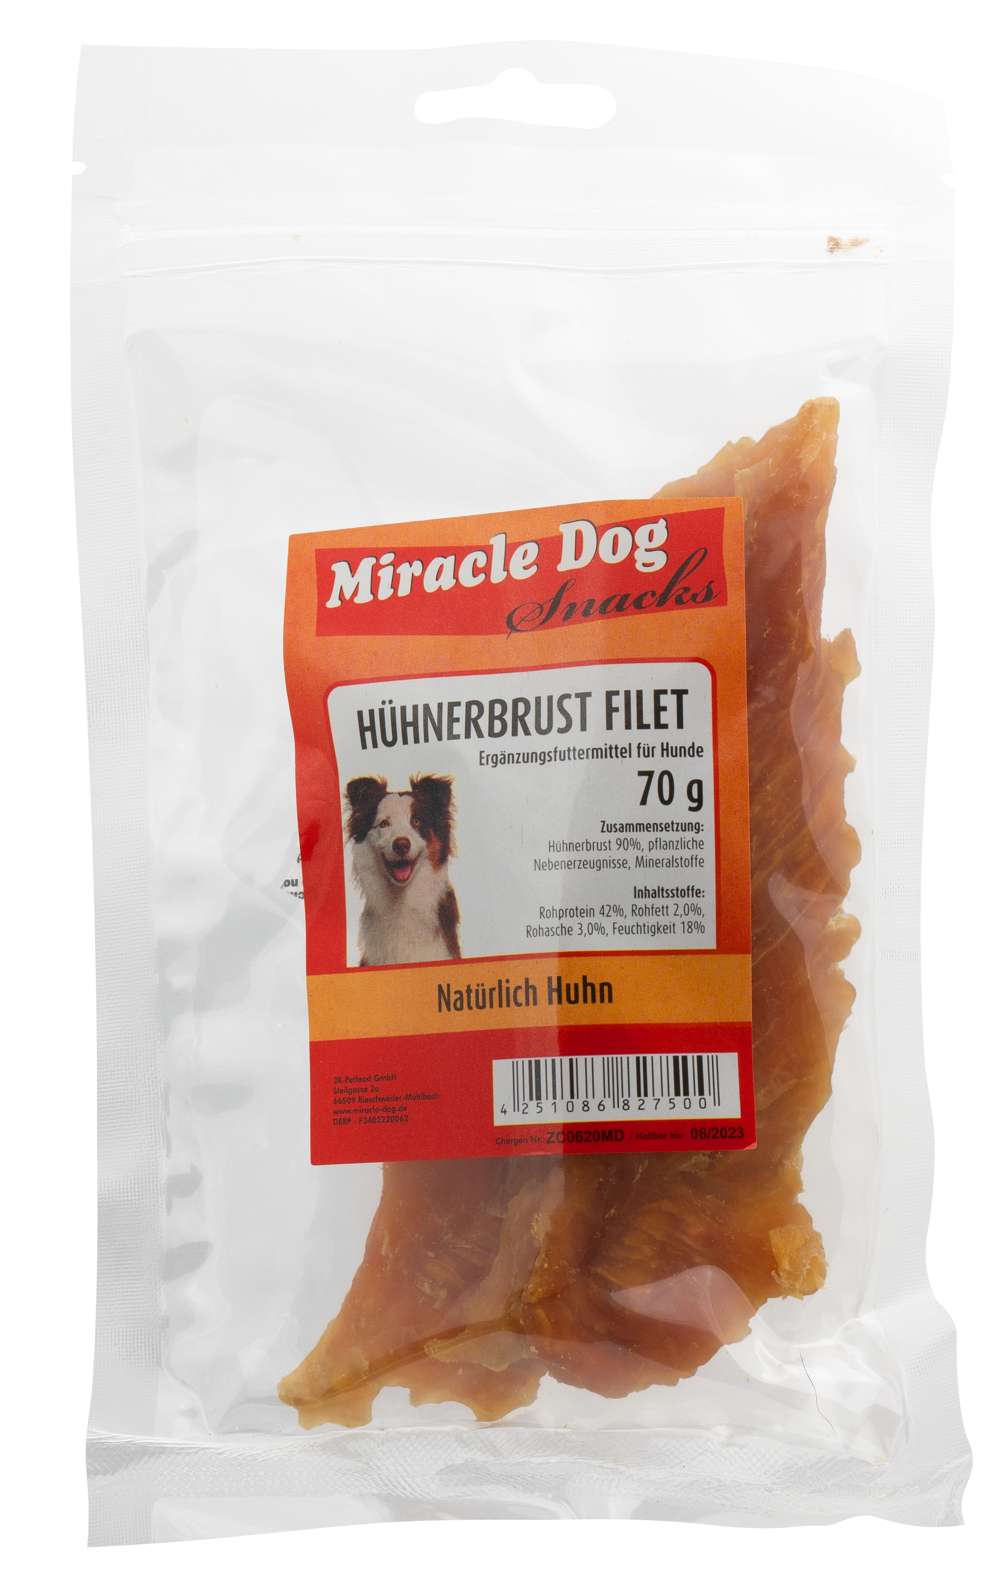 Miracle Dog Hühnerbrust & Filet